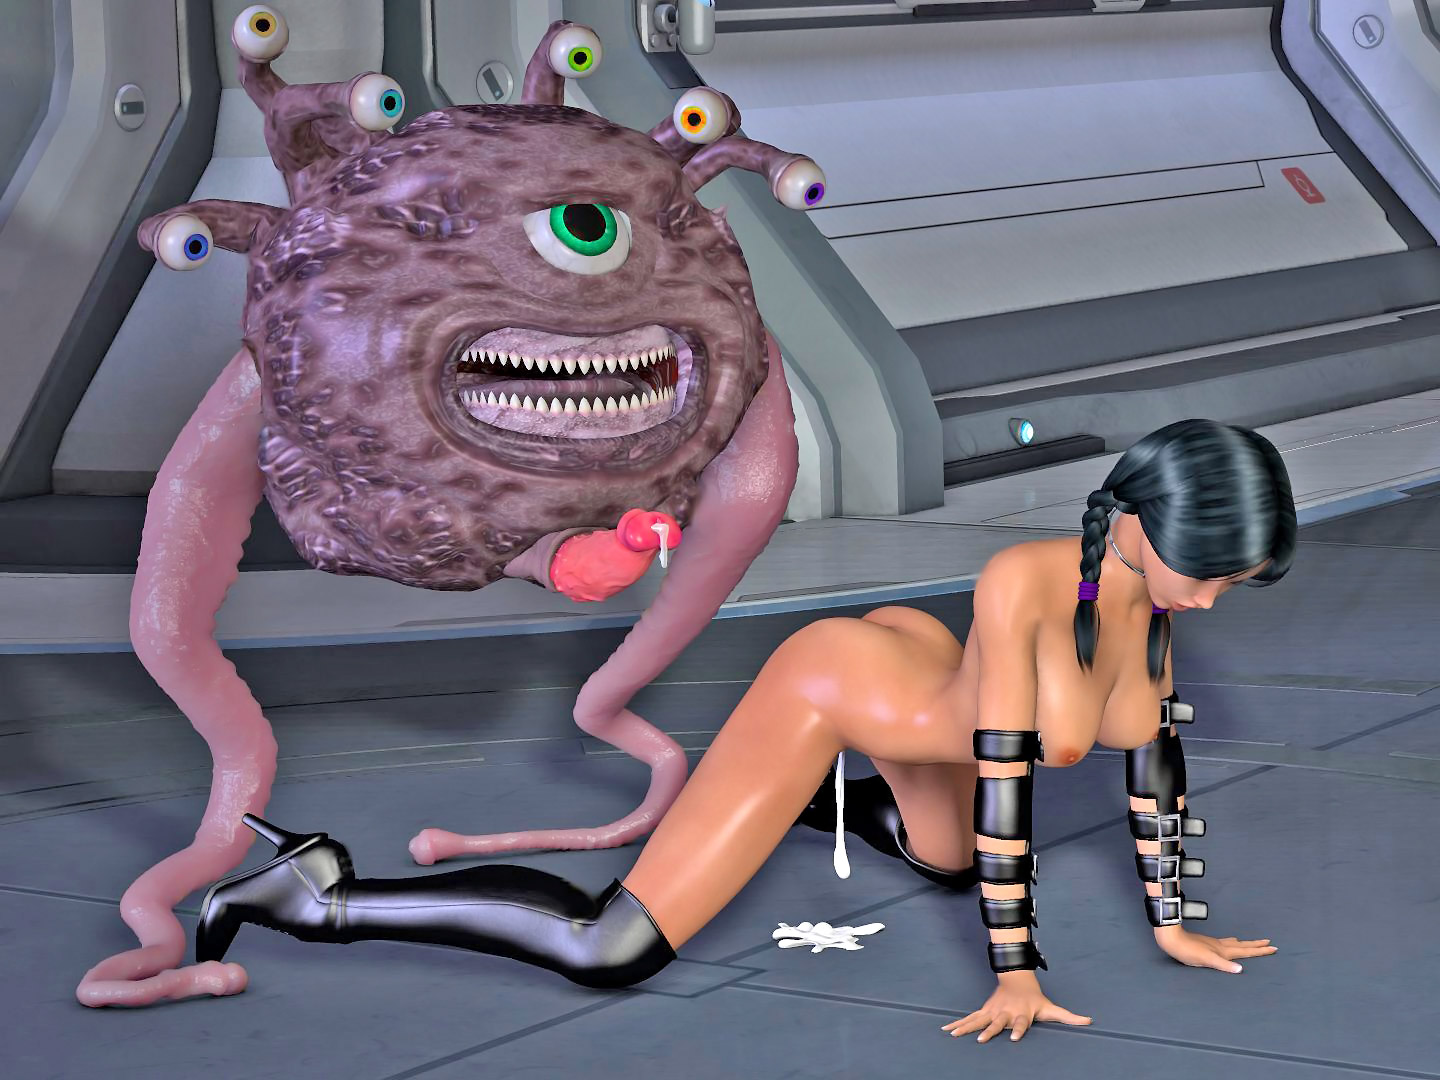 Anime monster fuck for pretty brunette at spaceship! | Porncraft 3d